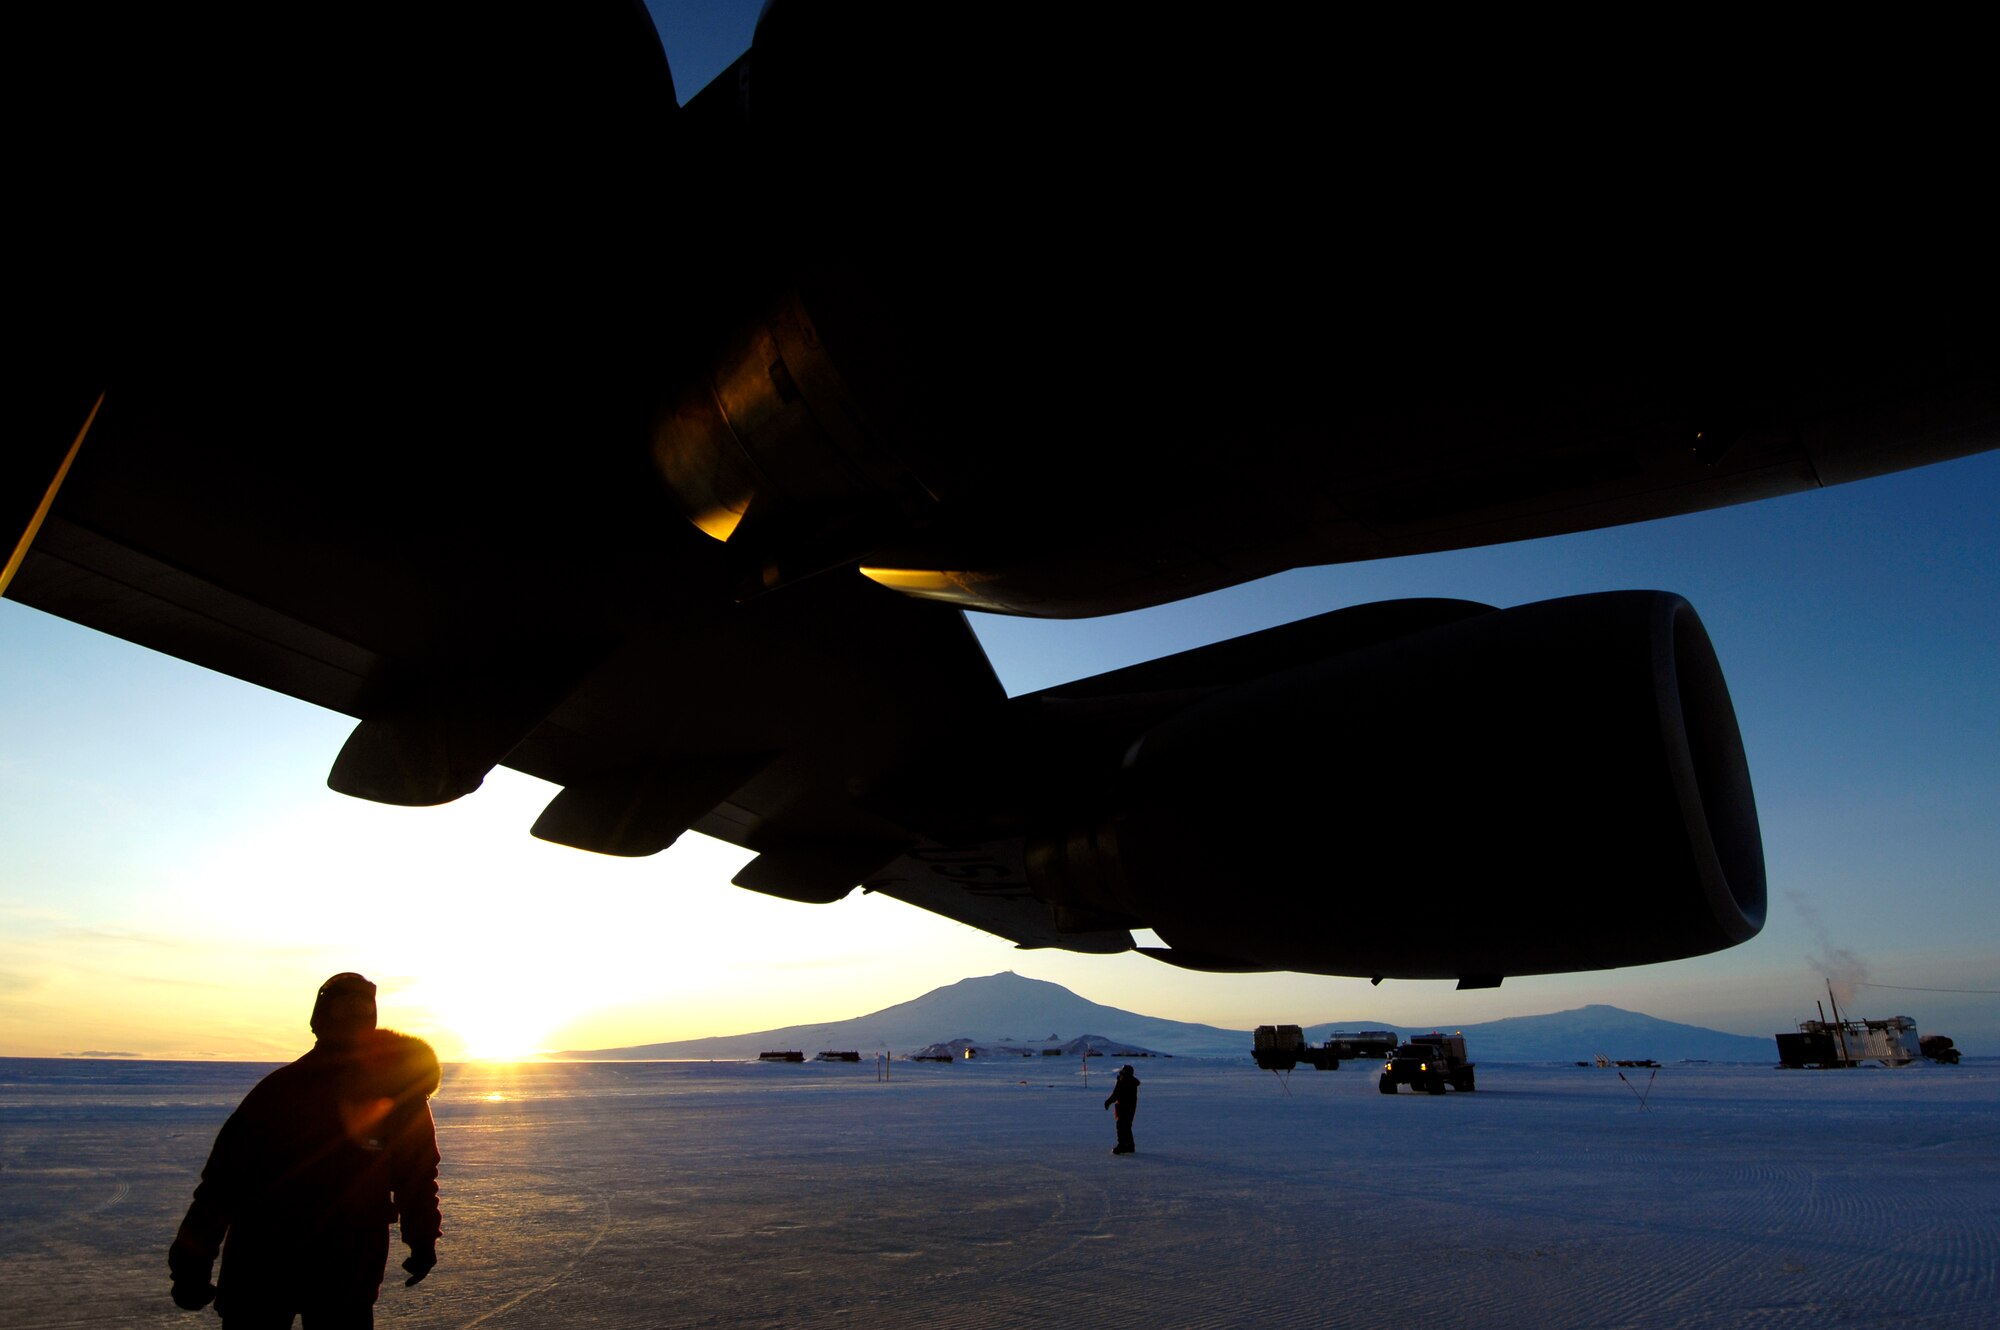 Maintenance personnel conduct spot checks on a C-17 Globemaster III before starting engines and taking off from Pegasus White Ice Runway, Antarctica Aug. 25, 2007 during an Operation Deep Freeze winter fly-in mission. A C-17 and 31 Airmen from McChord Air Force Base, Wash. are conducting the annual winter fly-in augmentation of scientist, support personnel, food and equipment for the U.S. Antarctic Program at McMurdo Station, Antarctica. WinFly is the opening of the first flights to McMurdo station, which closed for the austral winter in Feb. (U.S. Air Force photo/Tech. Sgt. Shane A. Cuomo)